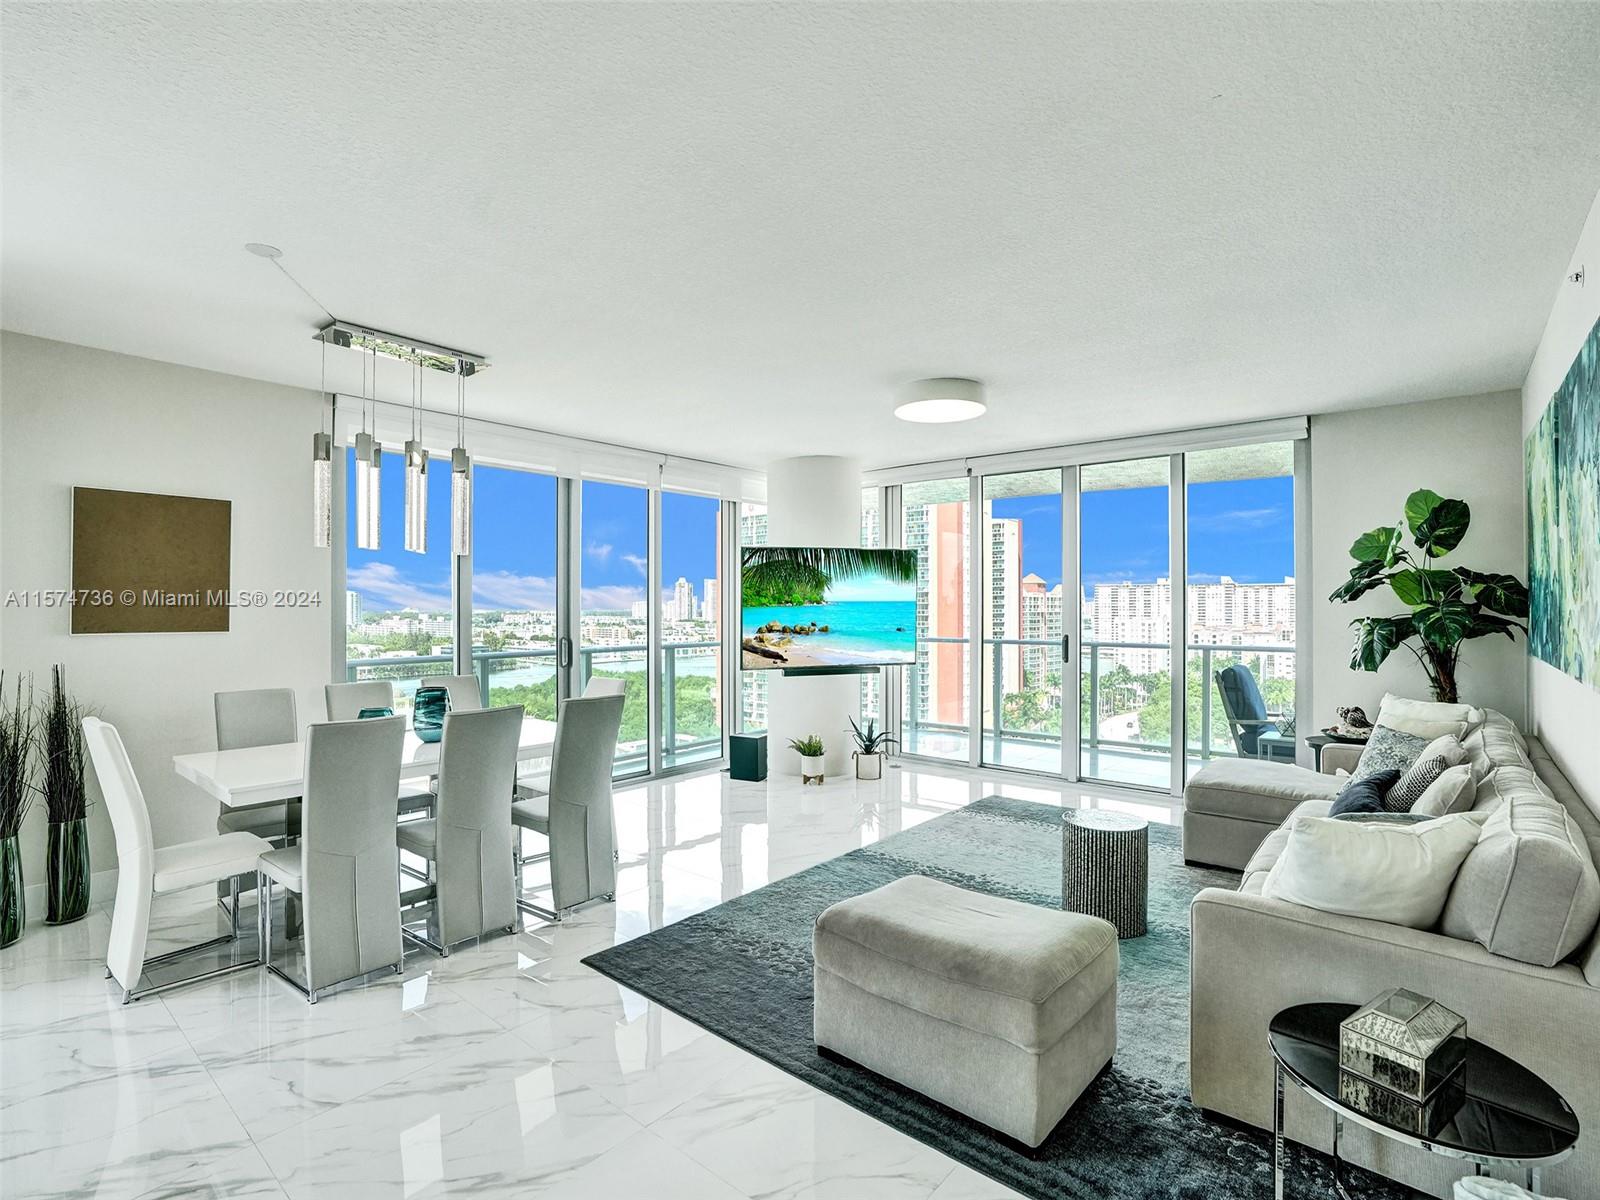 Property for Sale at 300 Sunny Isles Blvd 4-1407, Sunny Isles Beach, Miami-Dade County, Florida - Bedrooms: 3 
Bathrooms: 4  - $1,640,000